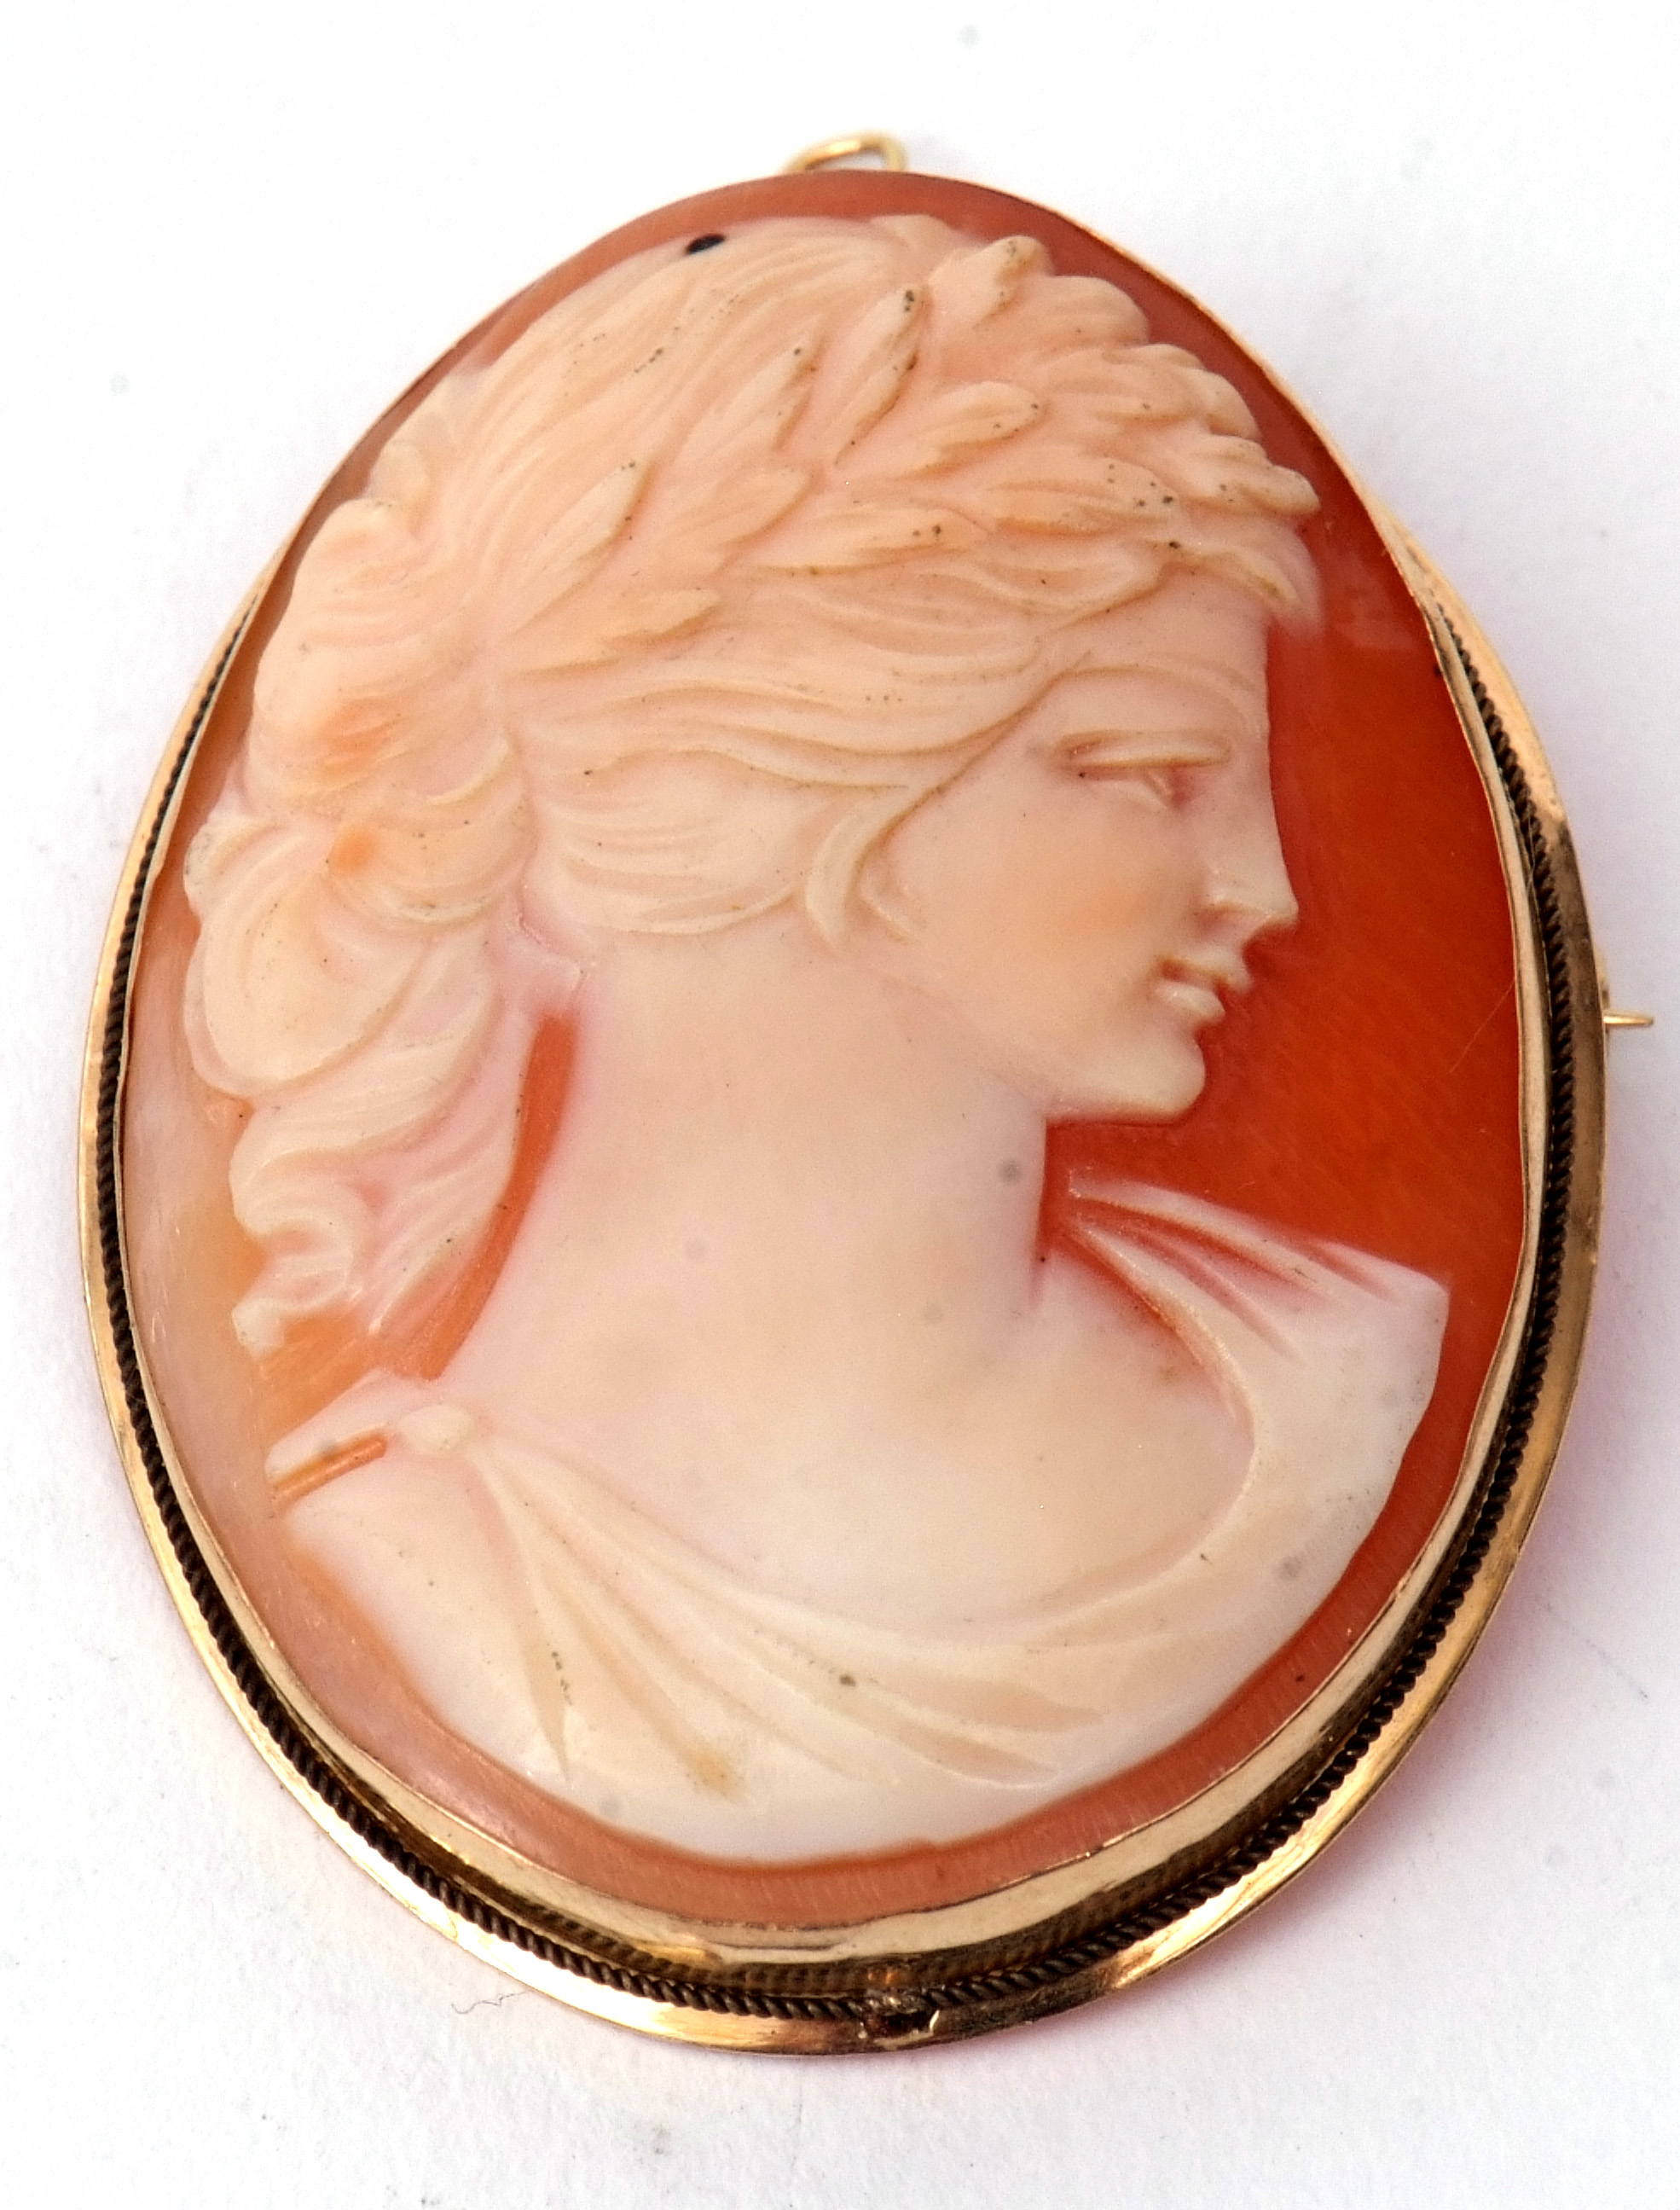 Vintage carved shell cameo, a head and shoulders profile of a classical lady, framed in a 750